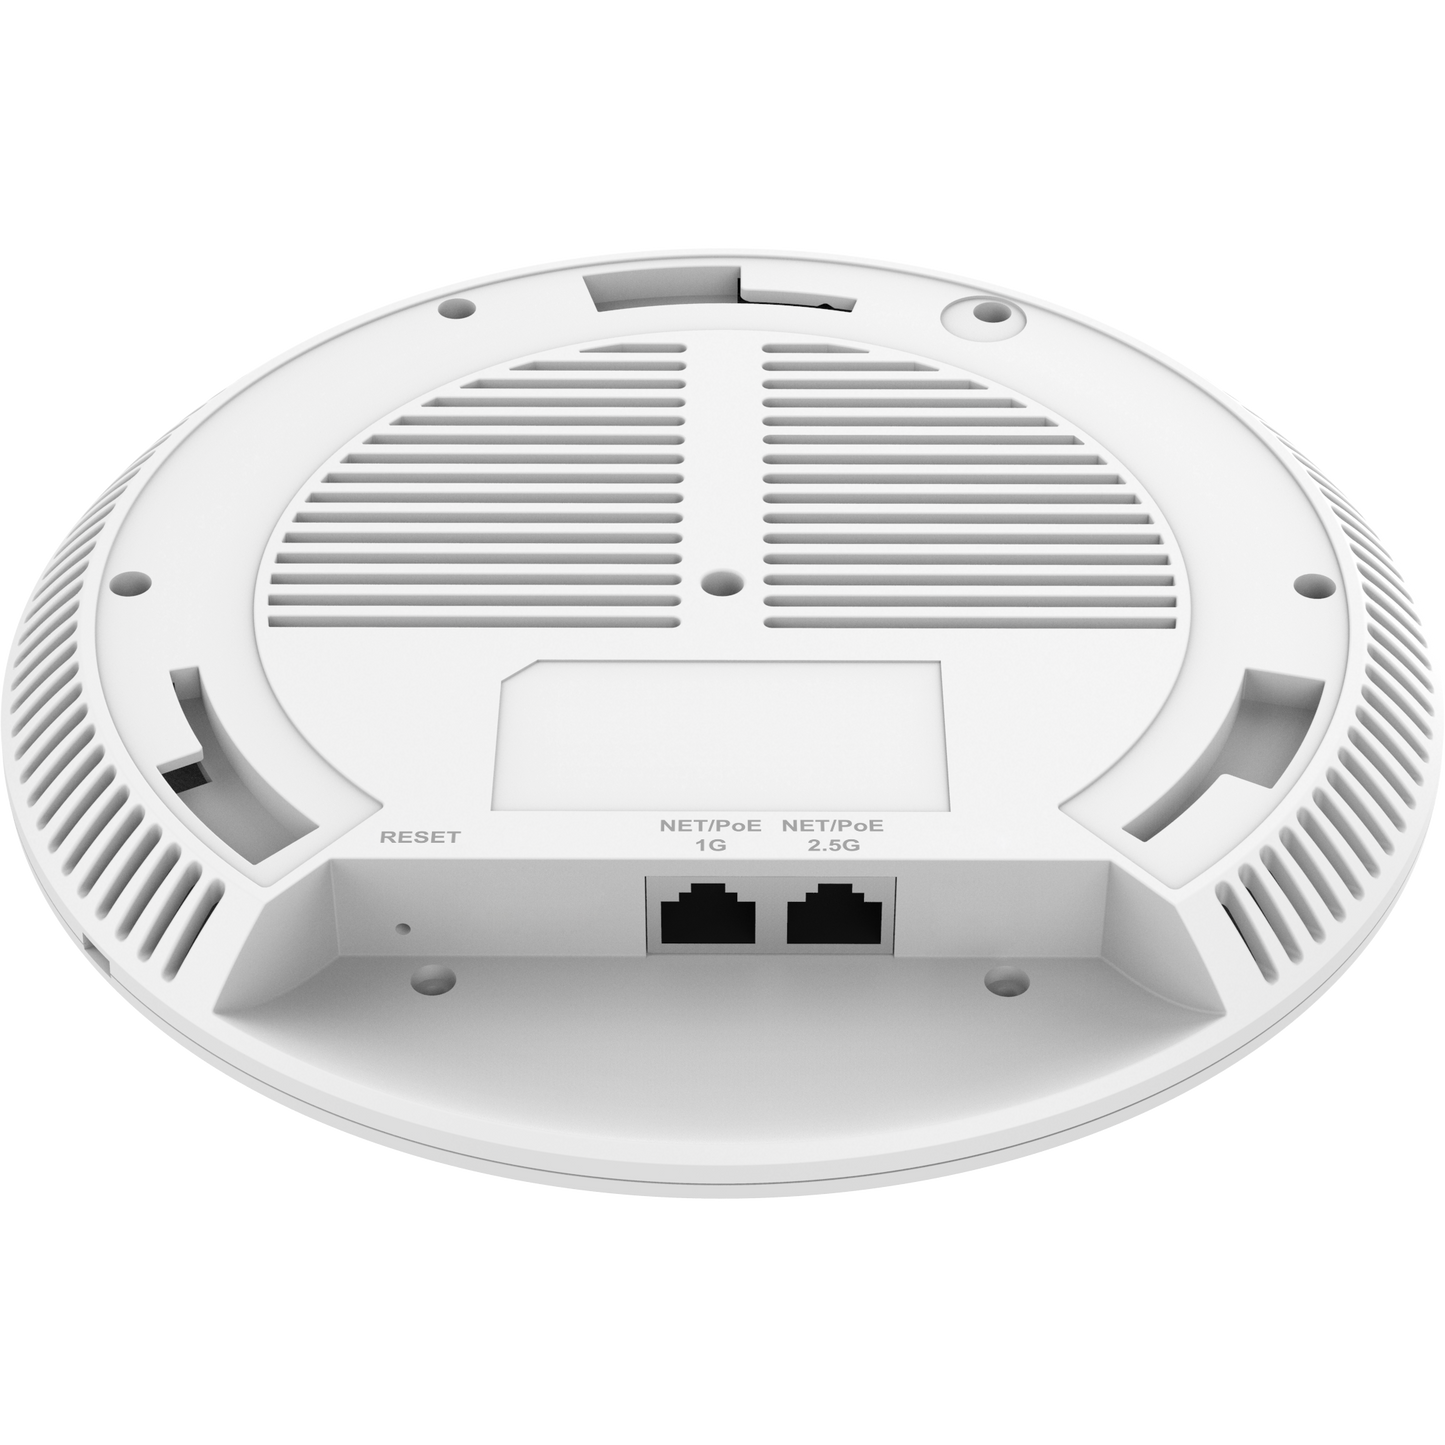 WiFi 6 Access Point with 2 PoE ports